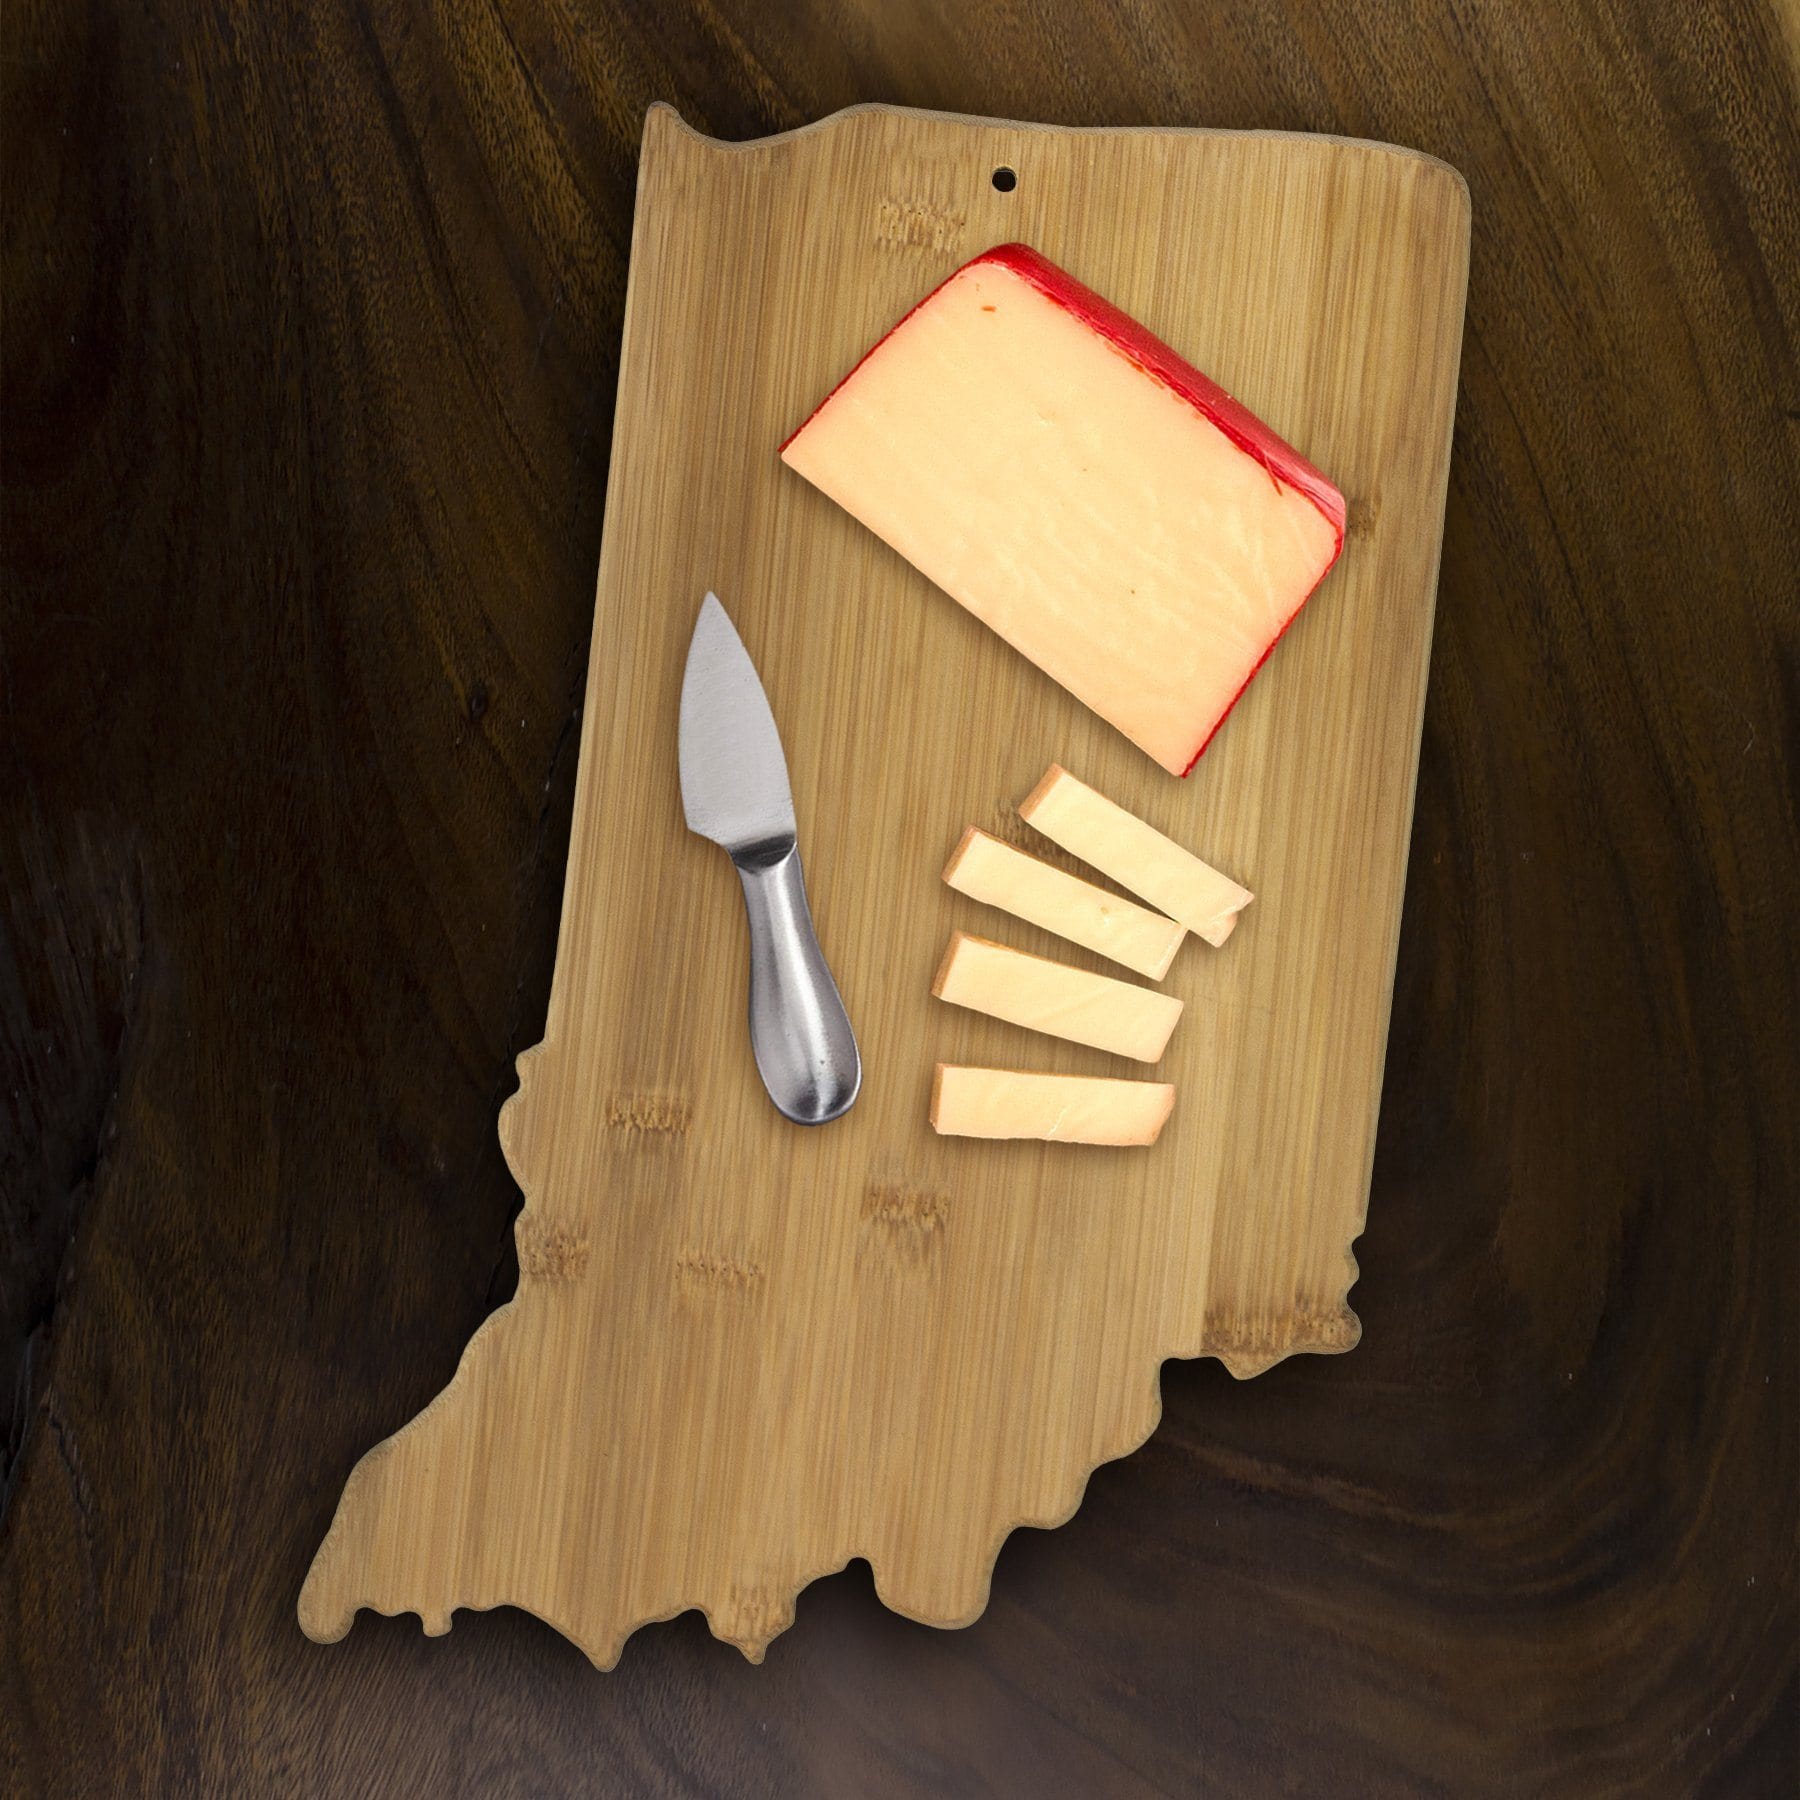 Totally Bamboo Indiana State Shaped Bamboo Serving and Cutting Board